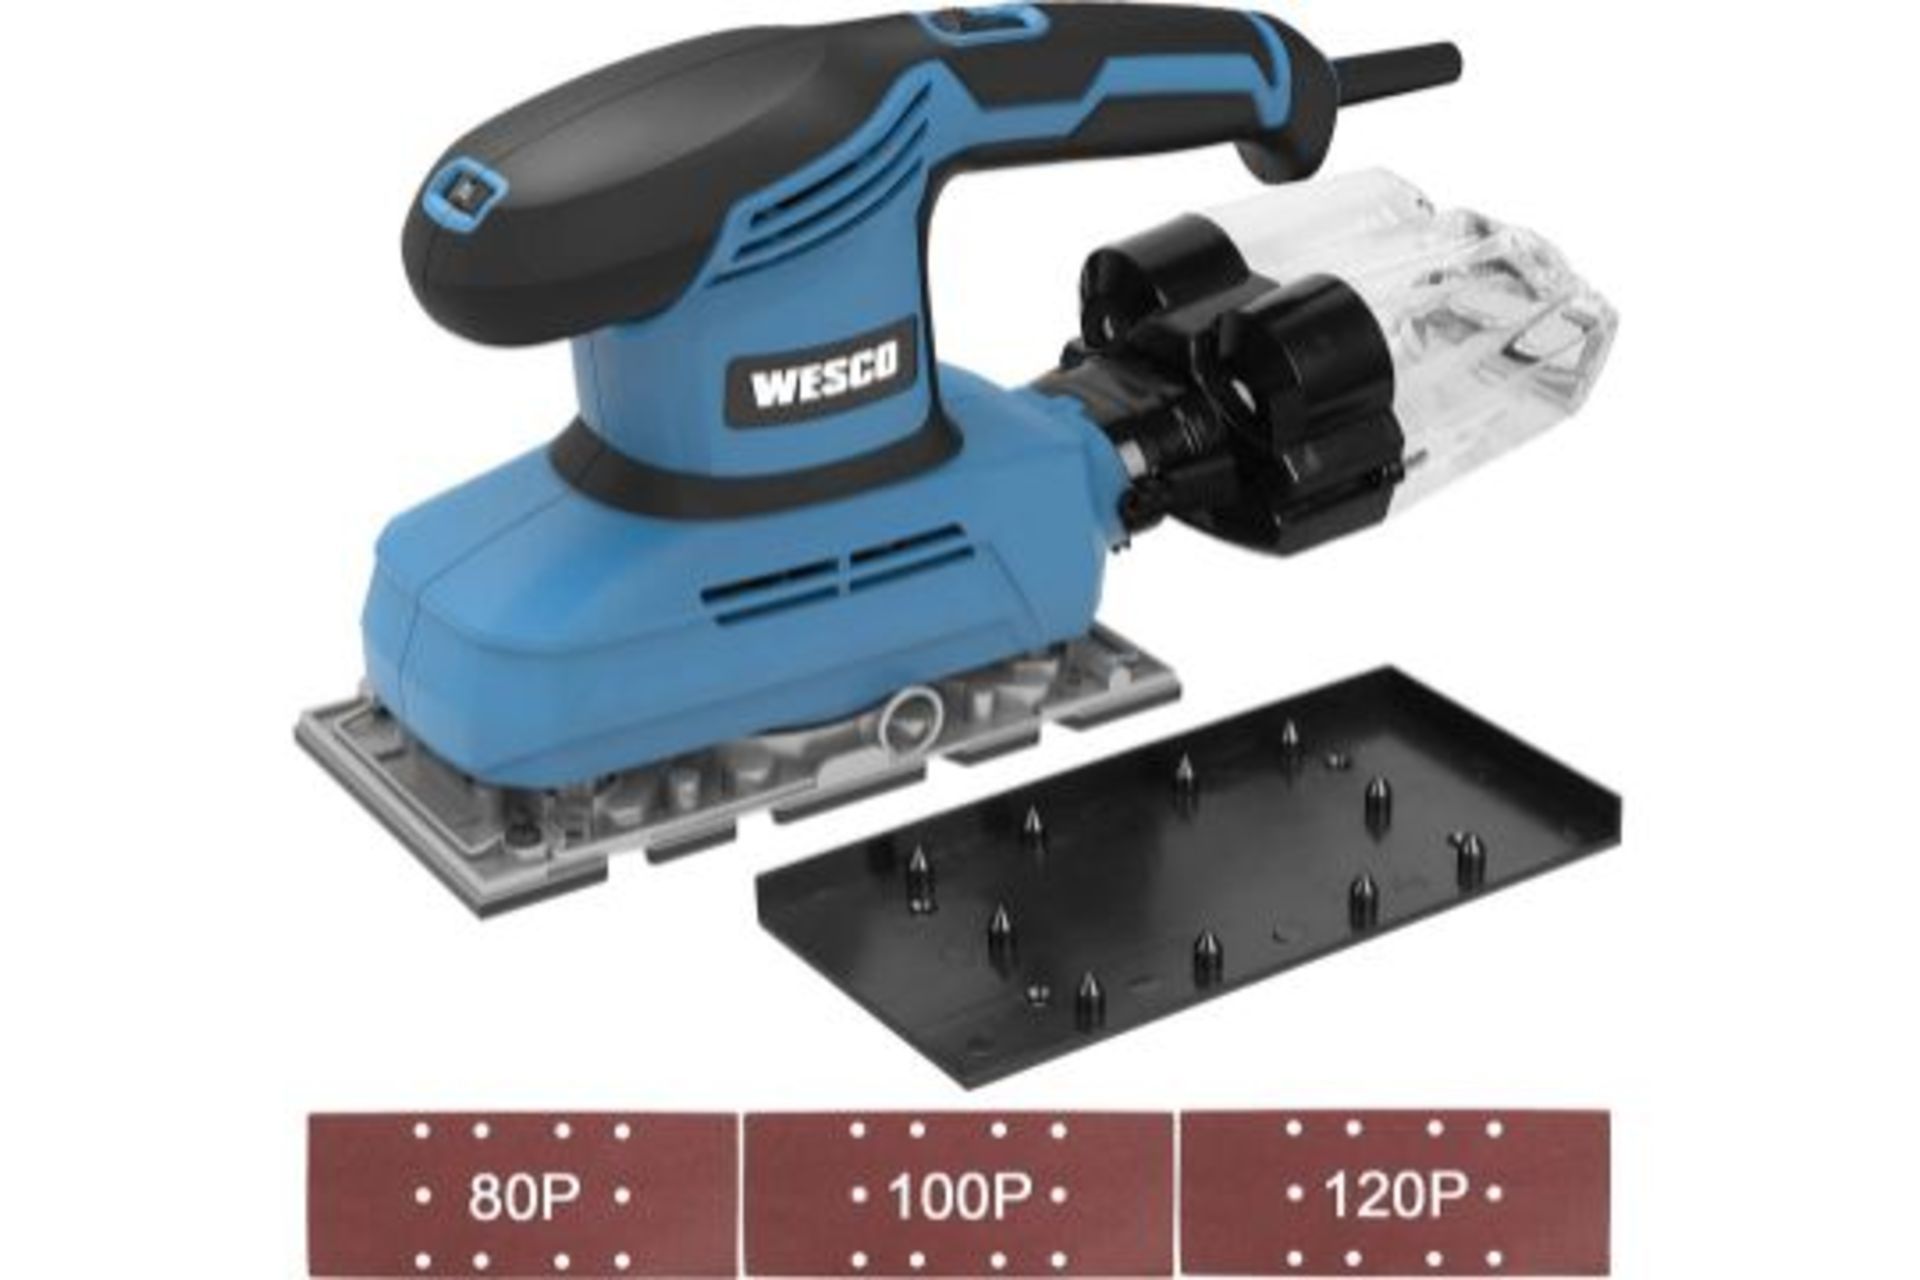 PALLET TO CONTAIN 36 x New & Boxed WESCO 240W 1/3 Sheet Sander with Aluminum Base, 11000RPM 7